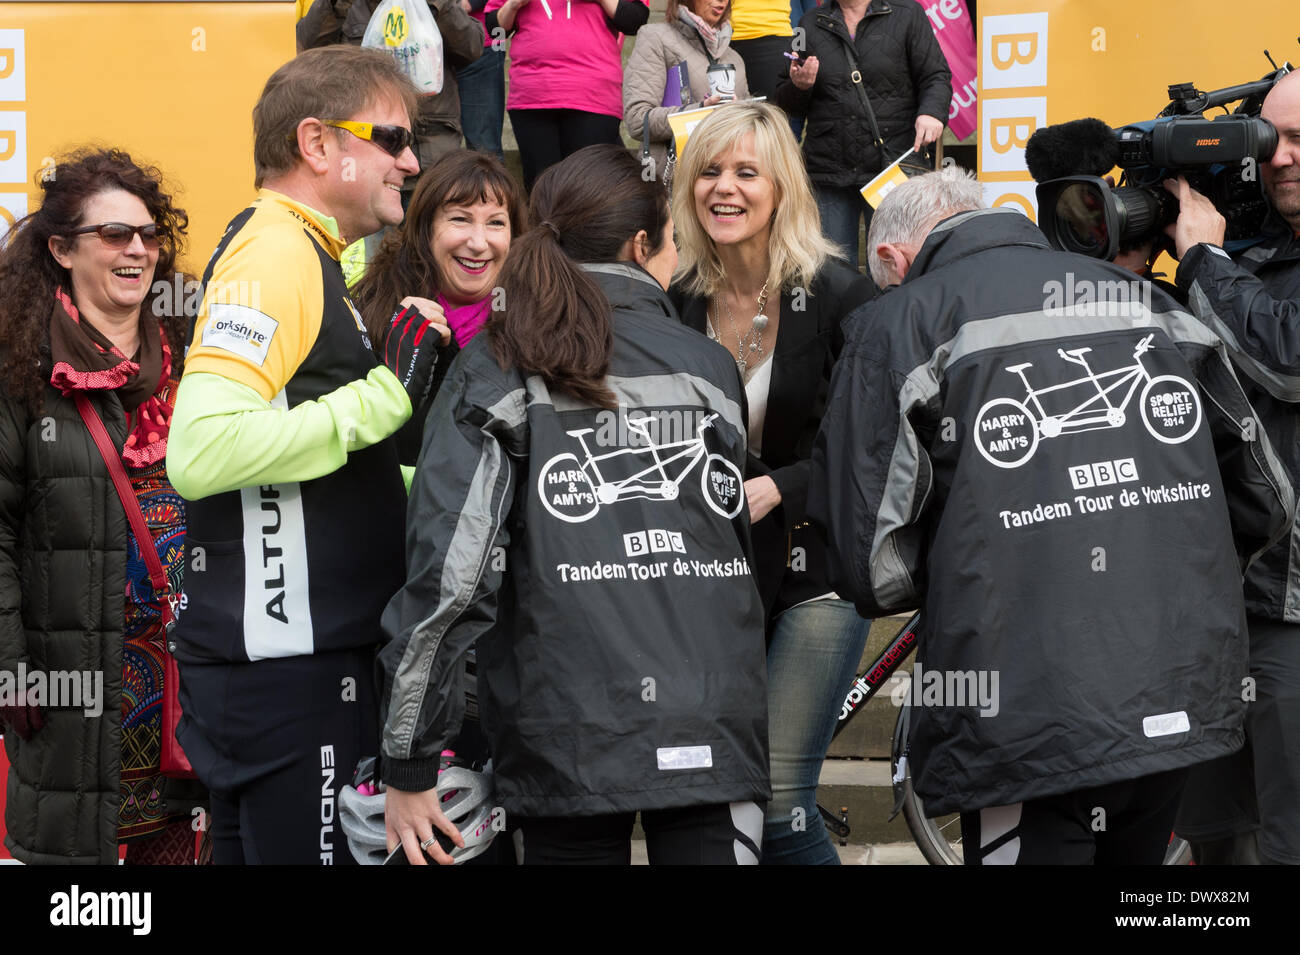 Look North's Harry & Amy's Tandem Tour de Yorkshire in aid of Sport Relief - Harry & Amy before the start, smiling, laughing & chatting to Gary Verity, Kay Mellor & Linda Barker - Leeds Town Hall, West Yorkshire, England, UK. Stock Photo